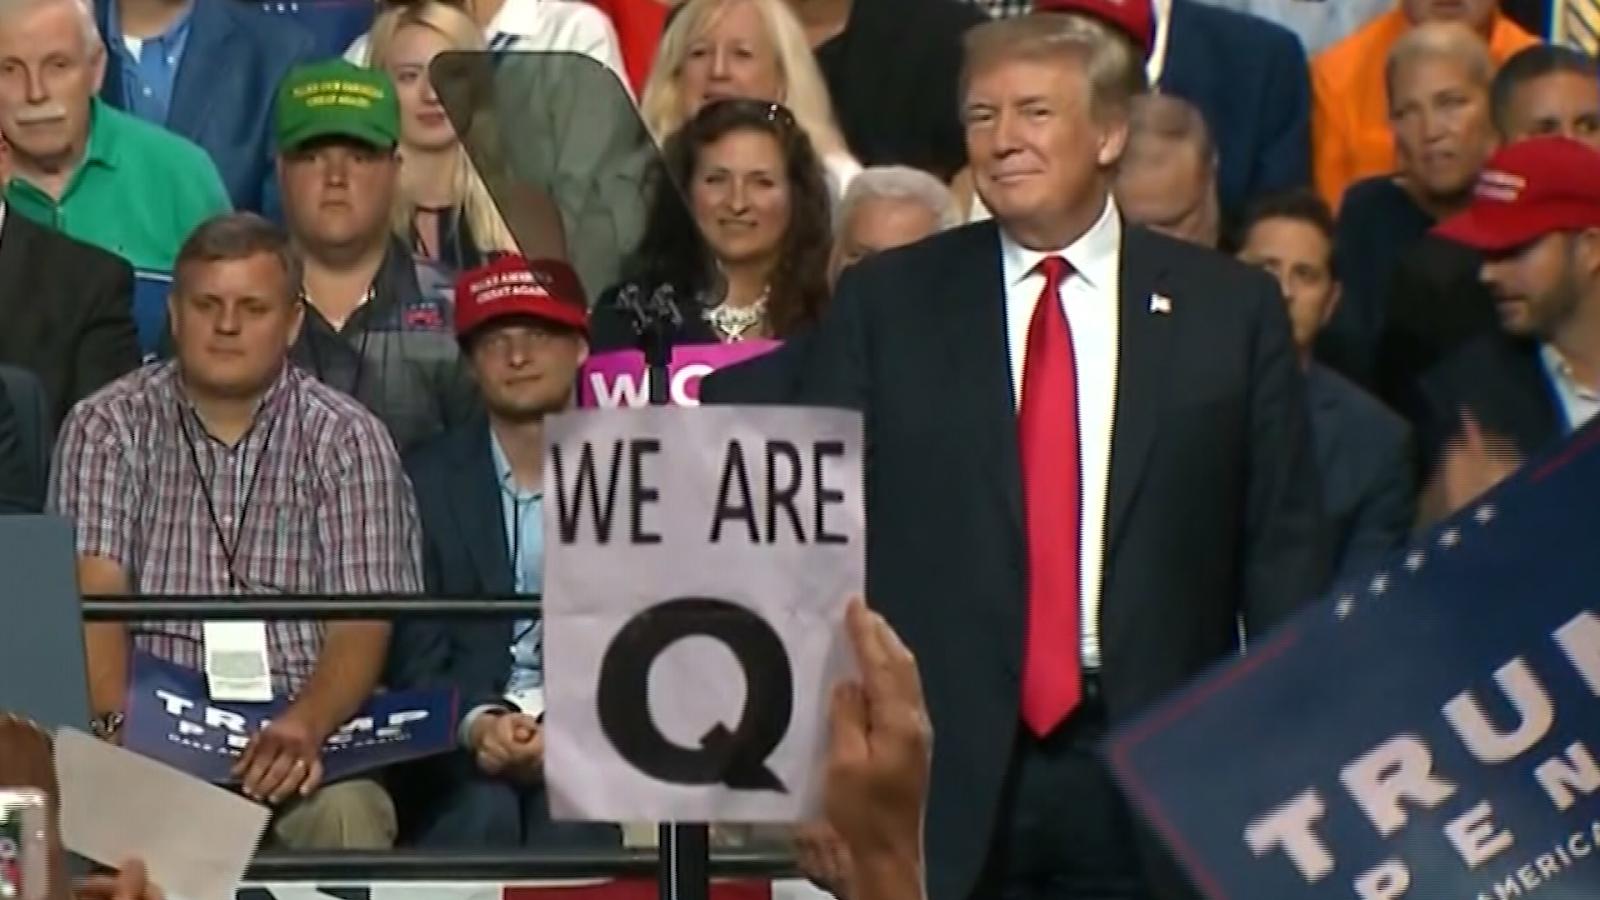 Conspiracy theory group QAnon appears at Trump rally - CNN Video